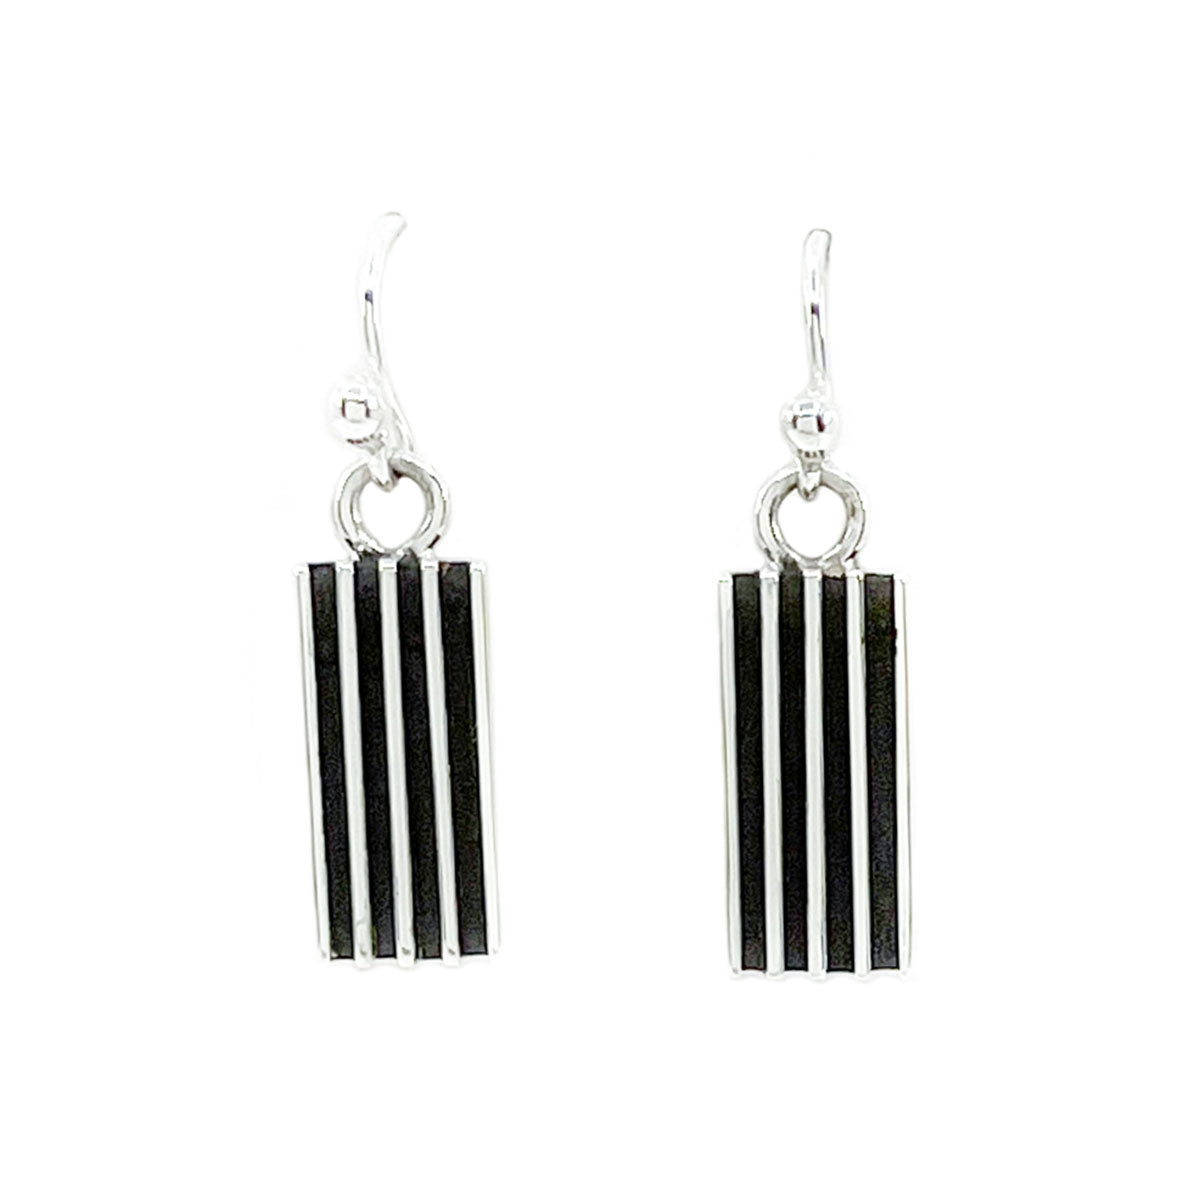 Sterling silver short "track style" dangle earrings  By well known Diné silversmith, Frances Jones Stamped with artist's hallmark on the back Measures approximately .75 inches long by .25 inches wide, dangles from ear lobe 1 inch